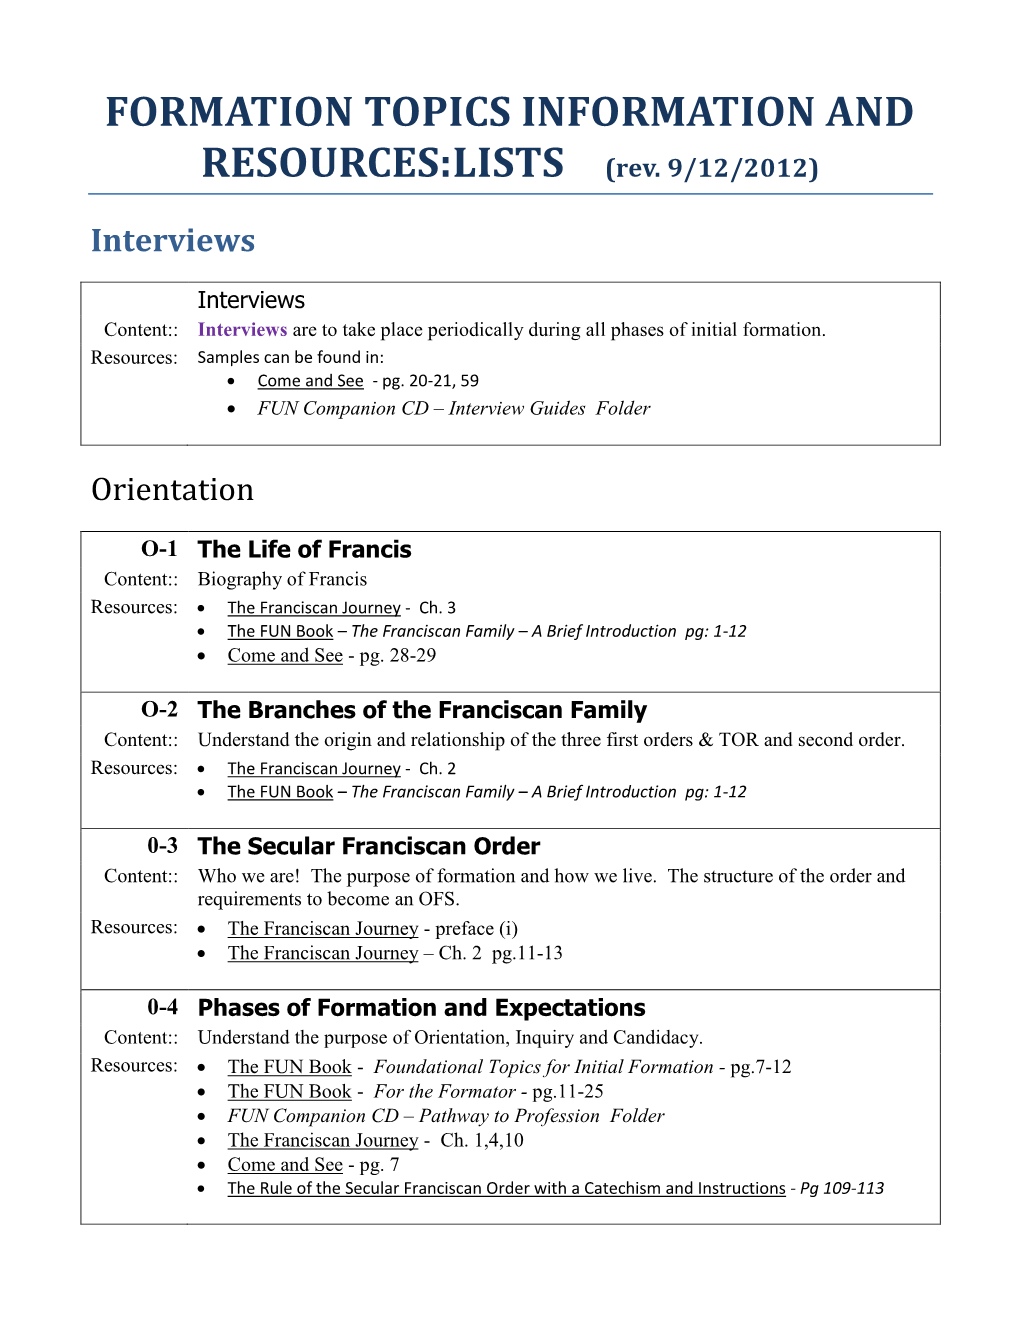 FORMATION TOPICS INFORMATION and RESOURCES:LISTS (Rev. 9/12/2012)